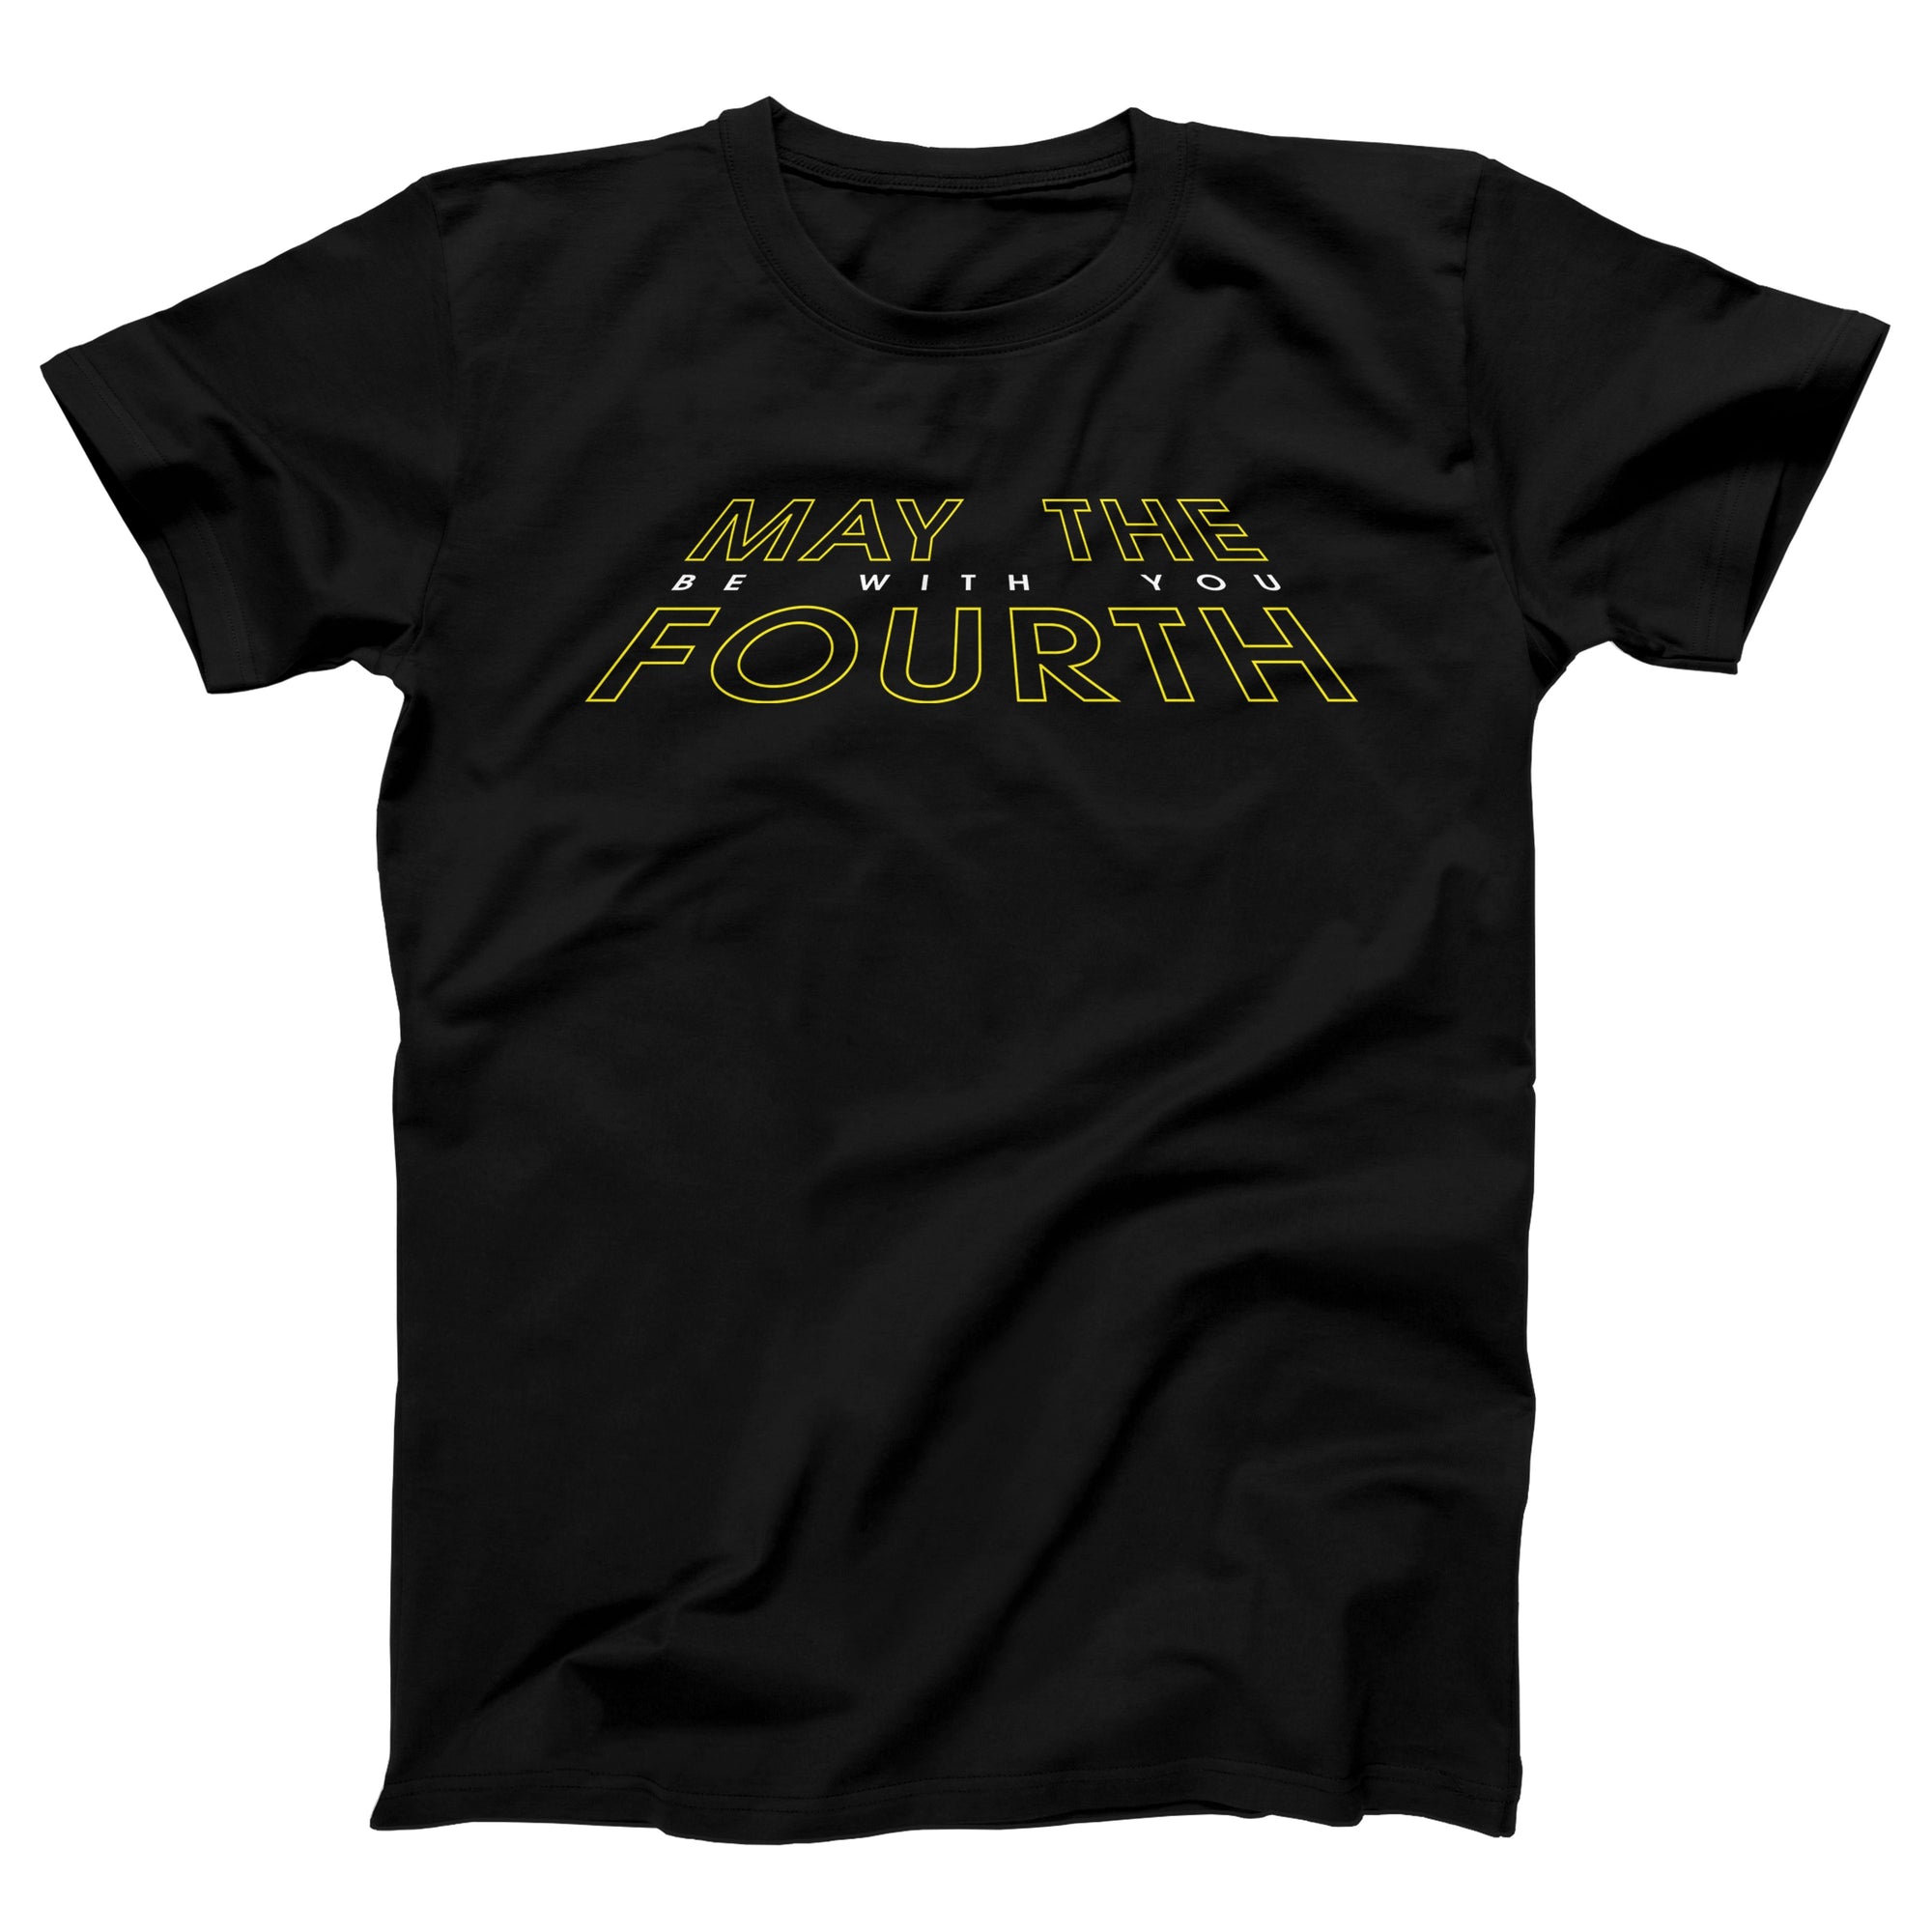 May the 4th Be With You Adult Unisex T-Shirt - anishphilip